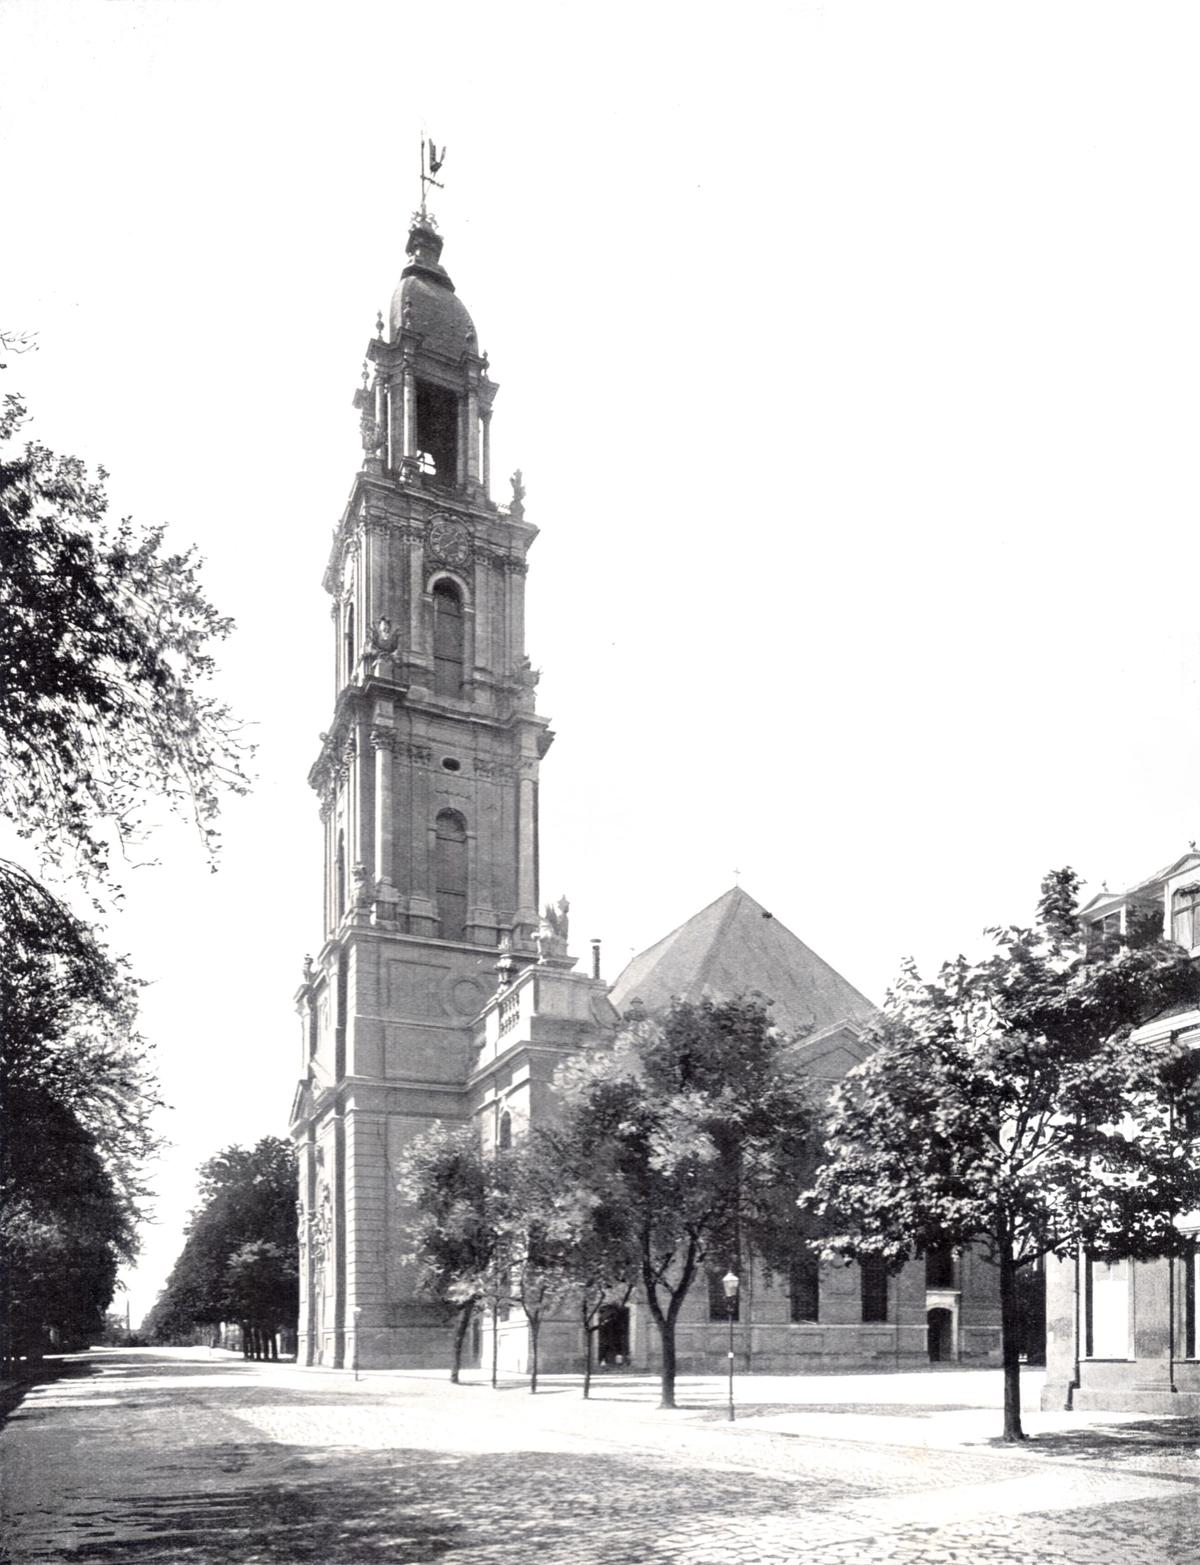 Potsdam's Garrison church is where a handshake took place between Adolf Hitler and President Paul von Hindenburg was interpreted as acceptance for the Nazi leader 